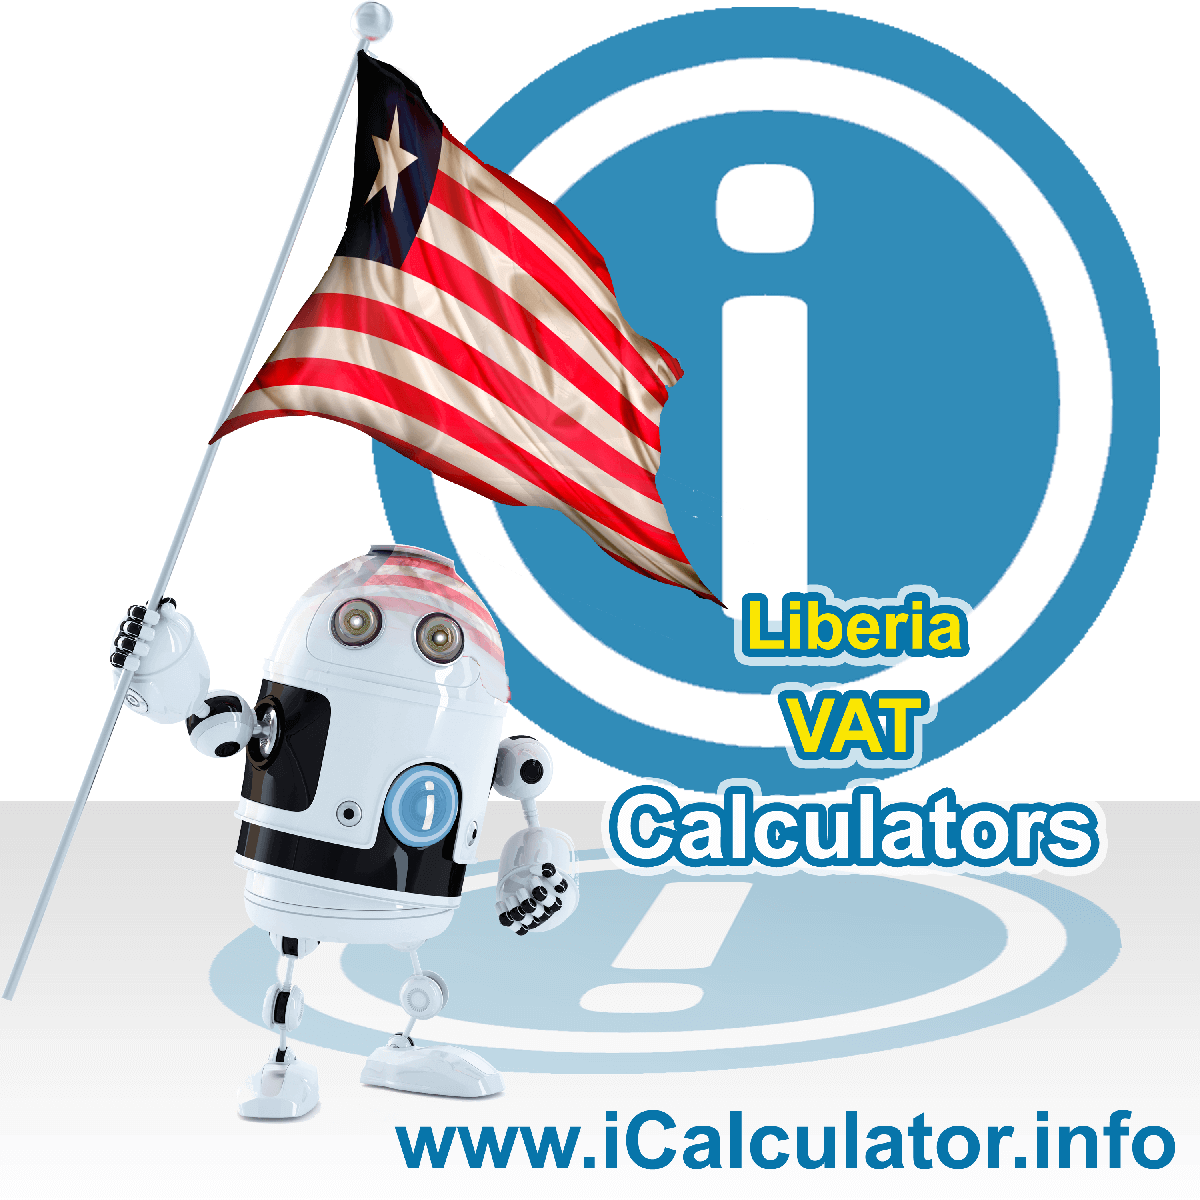 Liberia VAT Calculator. This image shows the Liberia flag and information relating to the VAT formula used for calculating Value Added Tax in Liberia using the Liberia VAT Calculator in 2023